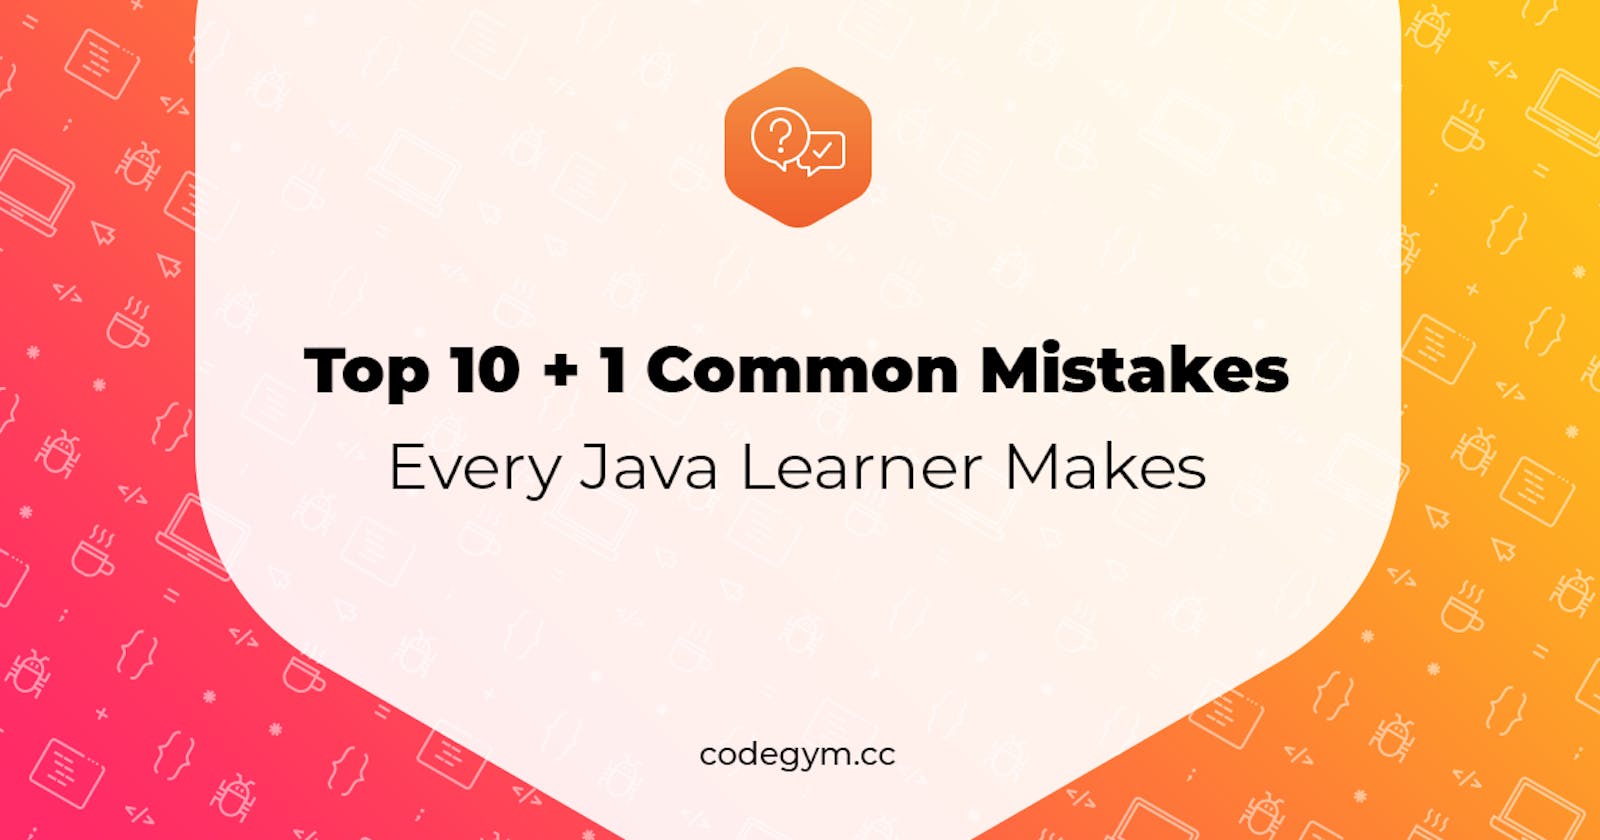 Top 10 + 1 common mistakes every Java learner makes